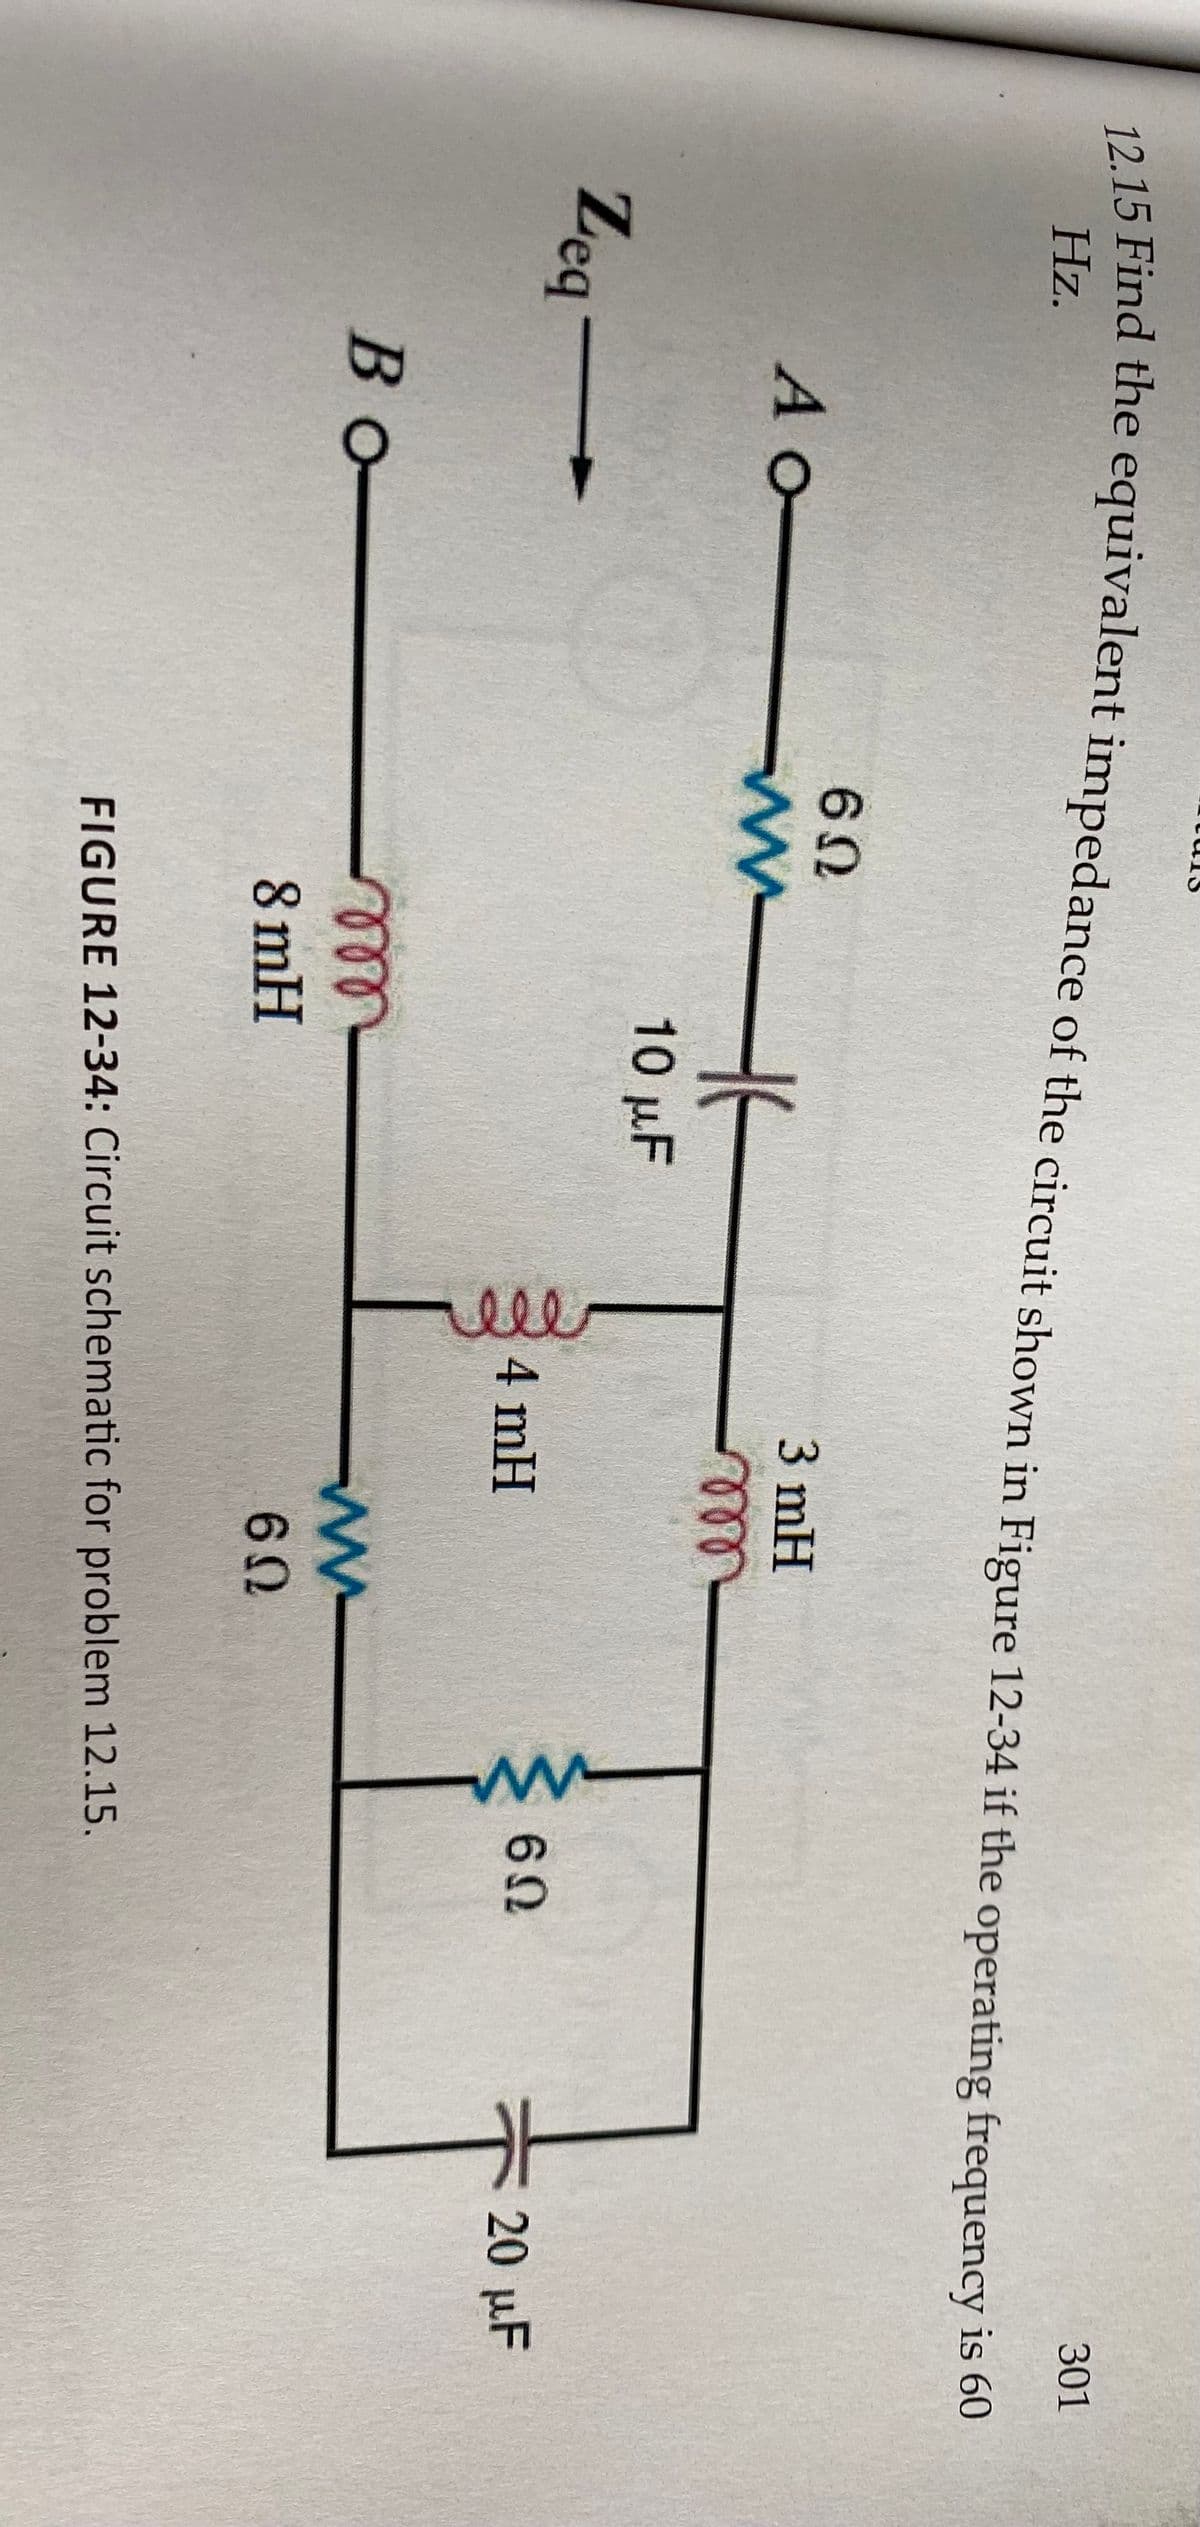 301
12 15 Find the equivalent impedance of the circuit shown in Figure 12-34 if the operating frequency is o0
Hz.
3 mH
AO-
10 µF
Zeq-
20 µF
4 mH
В о-
all
ww
8 mH
FIGURE 12-34: Circuit schematic for problem 12.15.
